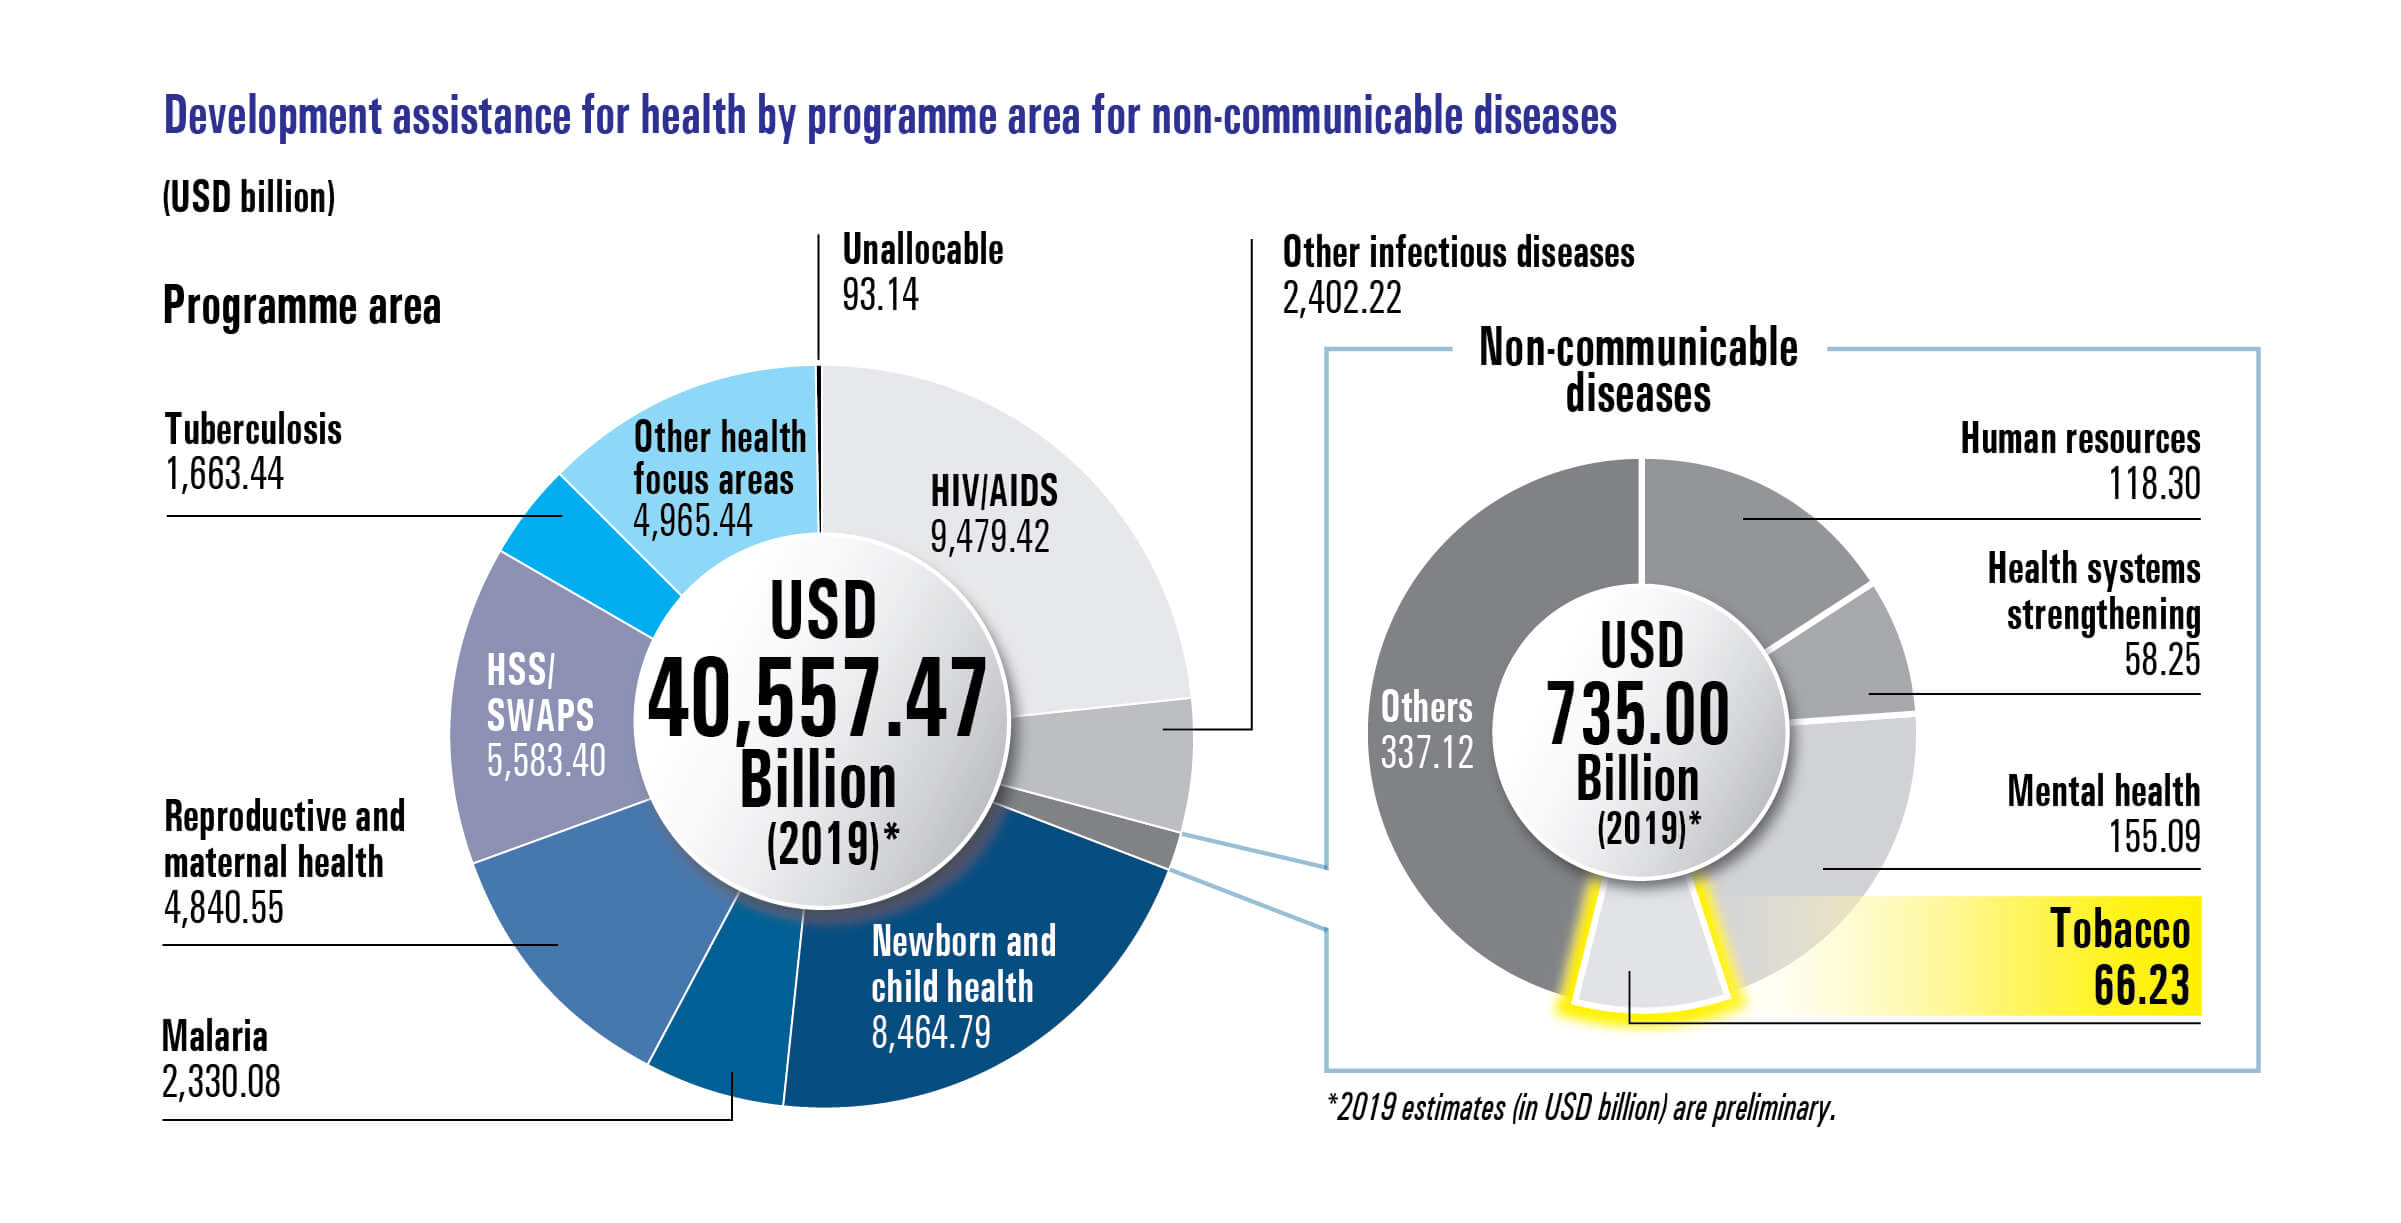 Development assistance for health by programme area for non-communicable diseases